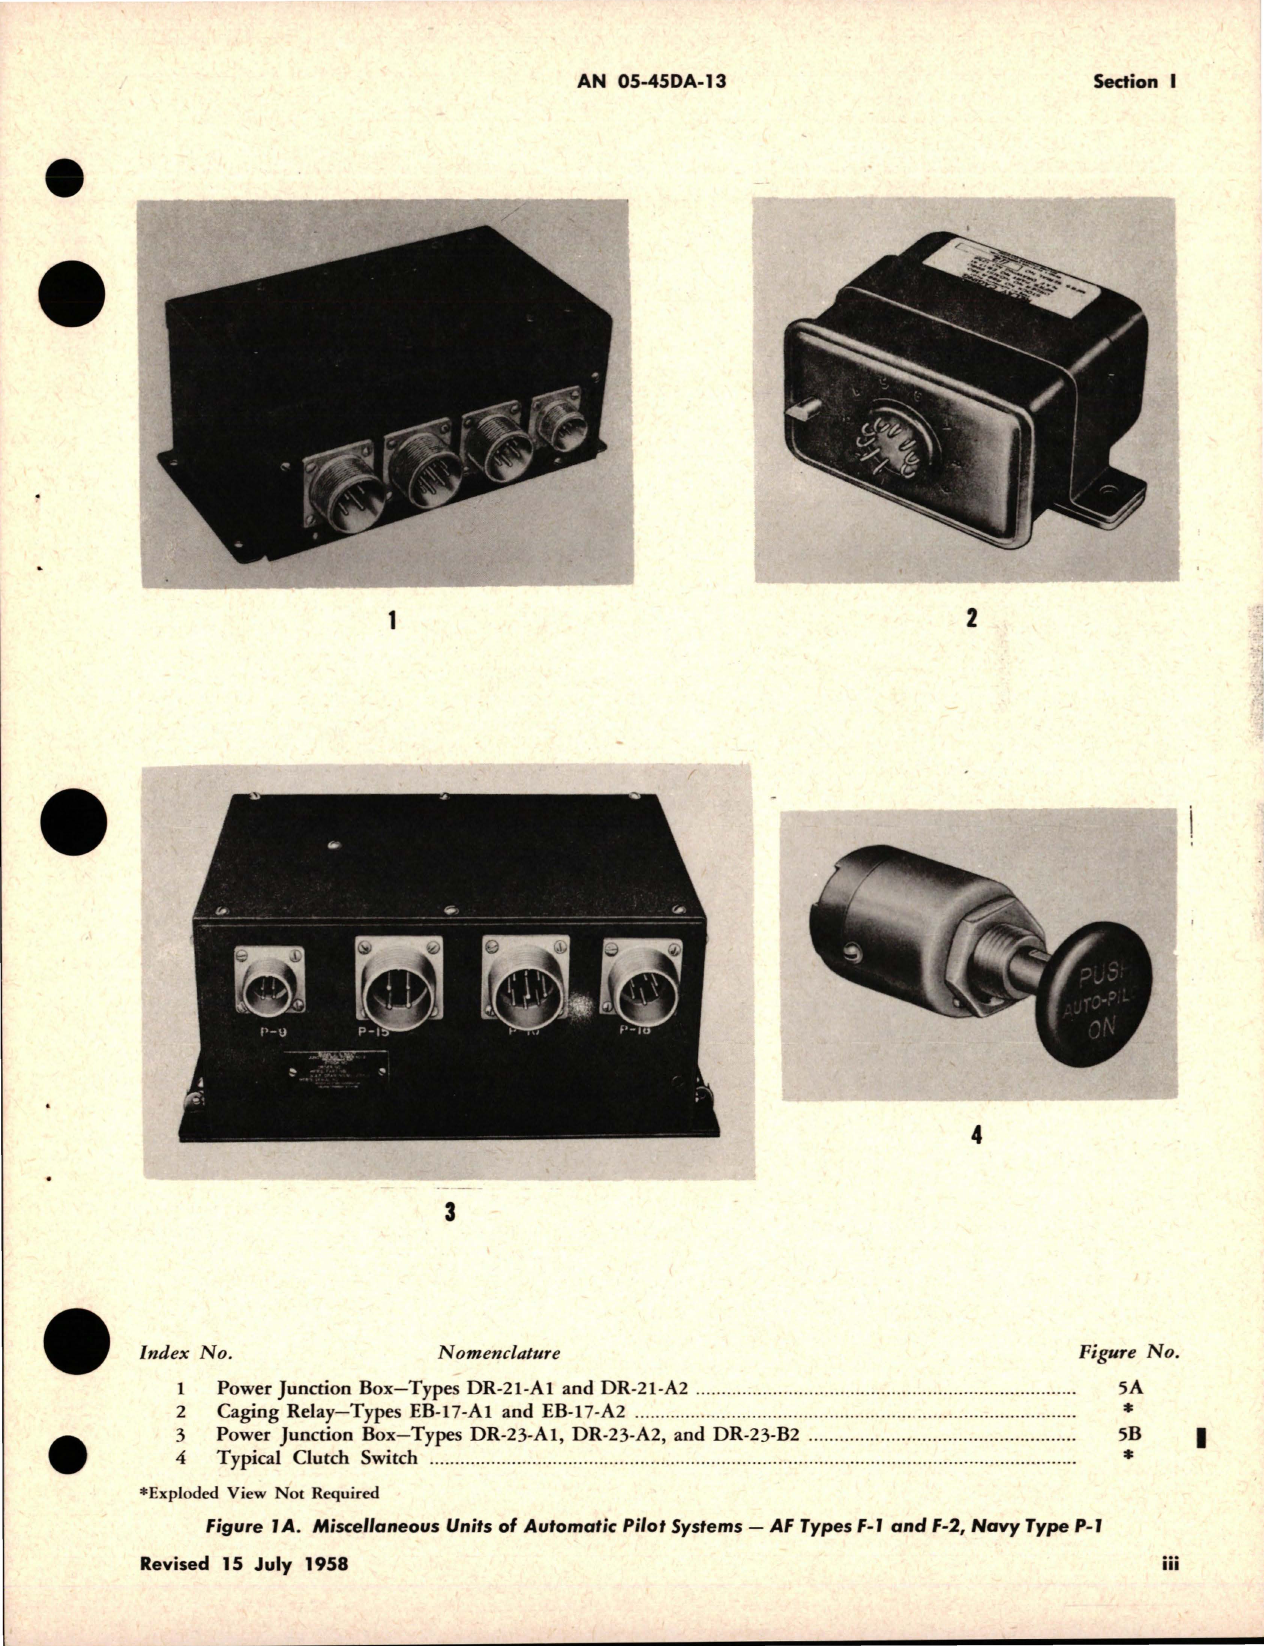 Sample page 5 from AirCorps Library document: Parts Catalog for Amplifier Adapter, Power Junction Box, Control Selector & Clutch Switch, Caging Relay and Pulley